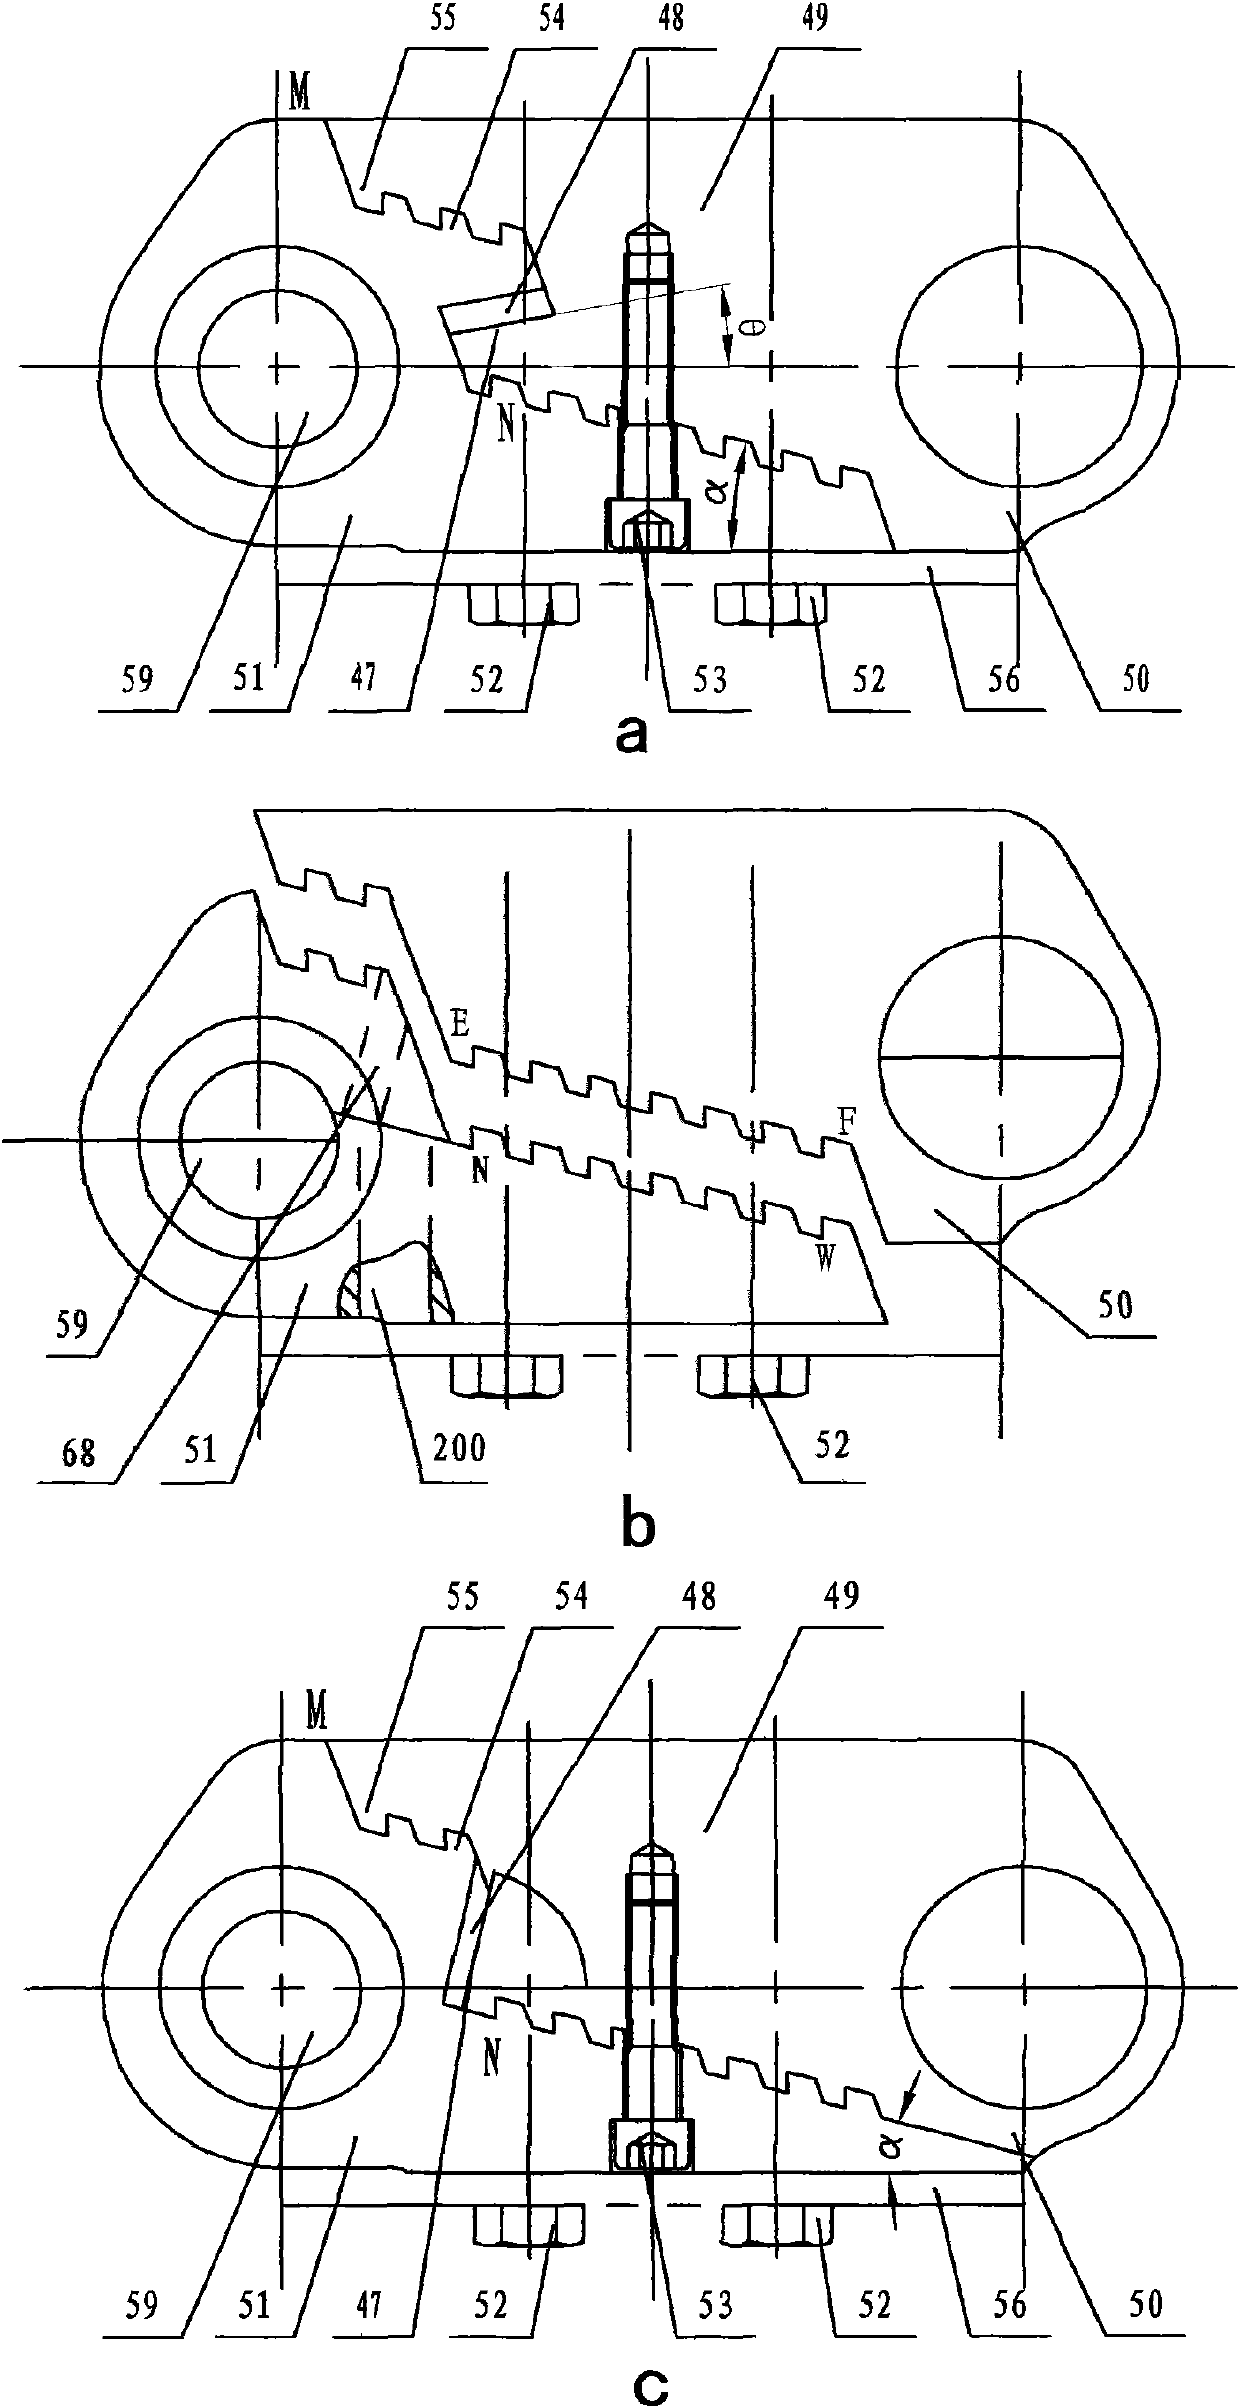 Track component and assembly method for constituting track